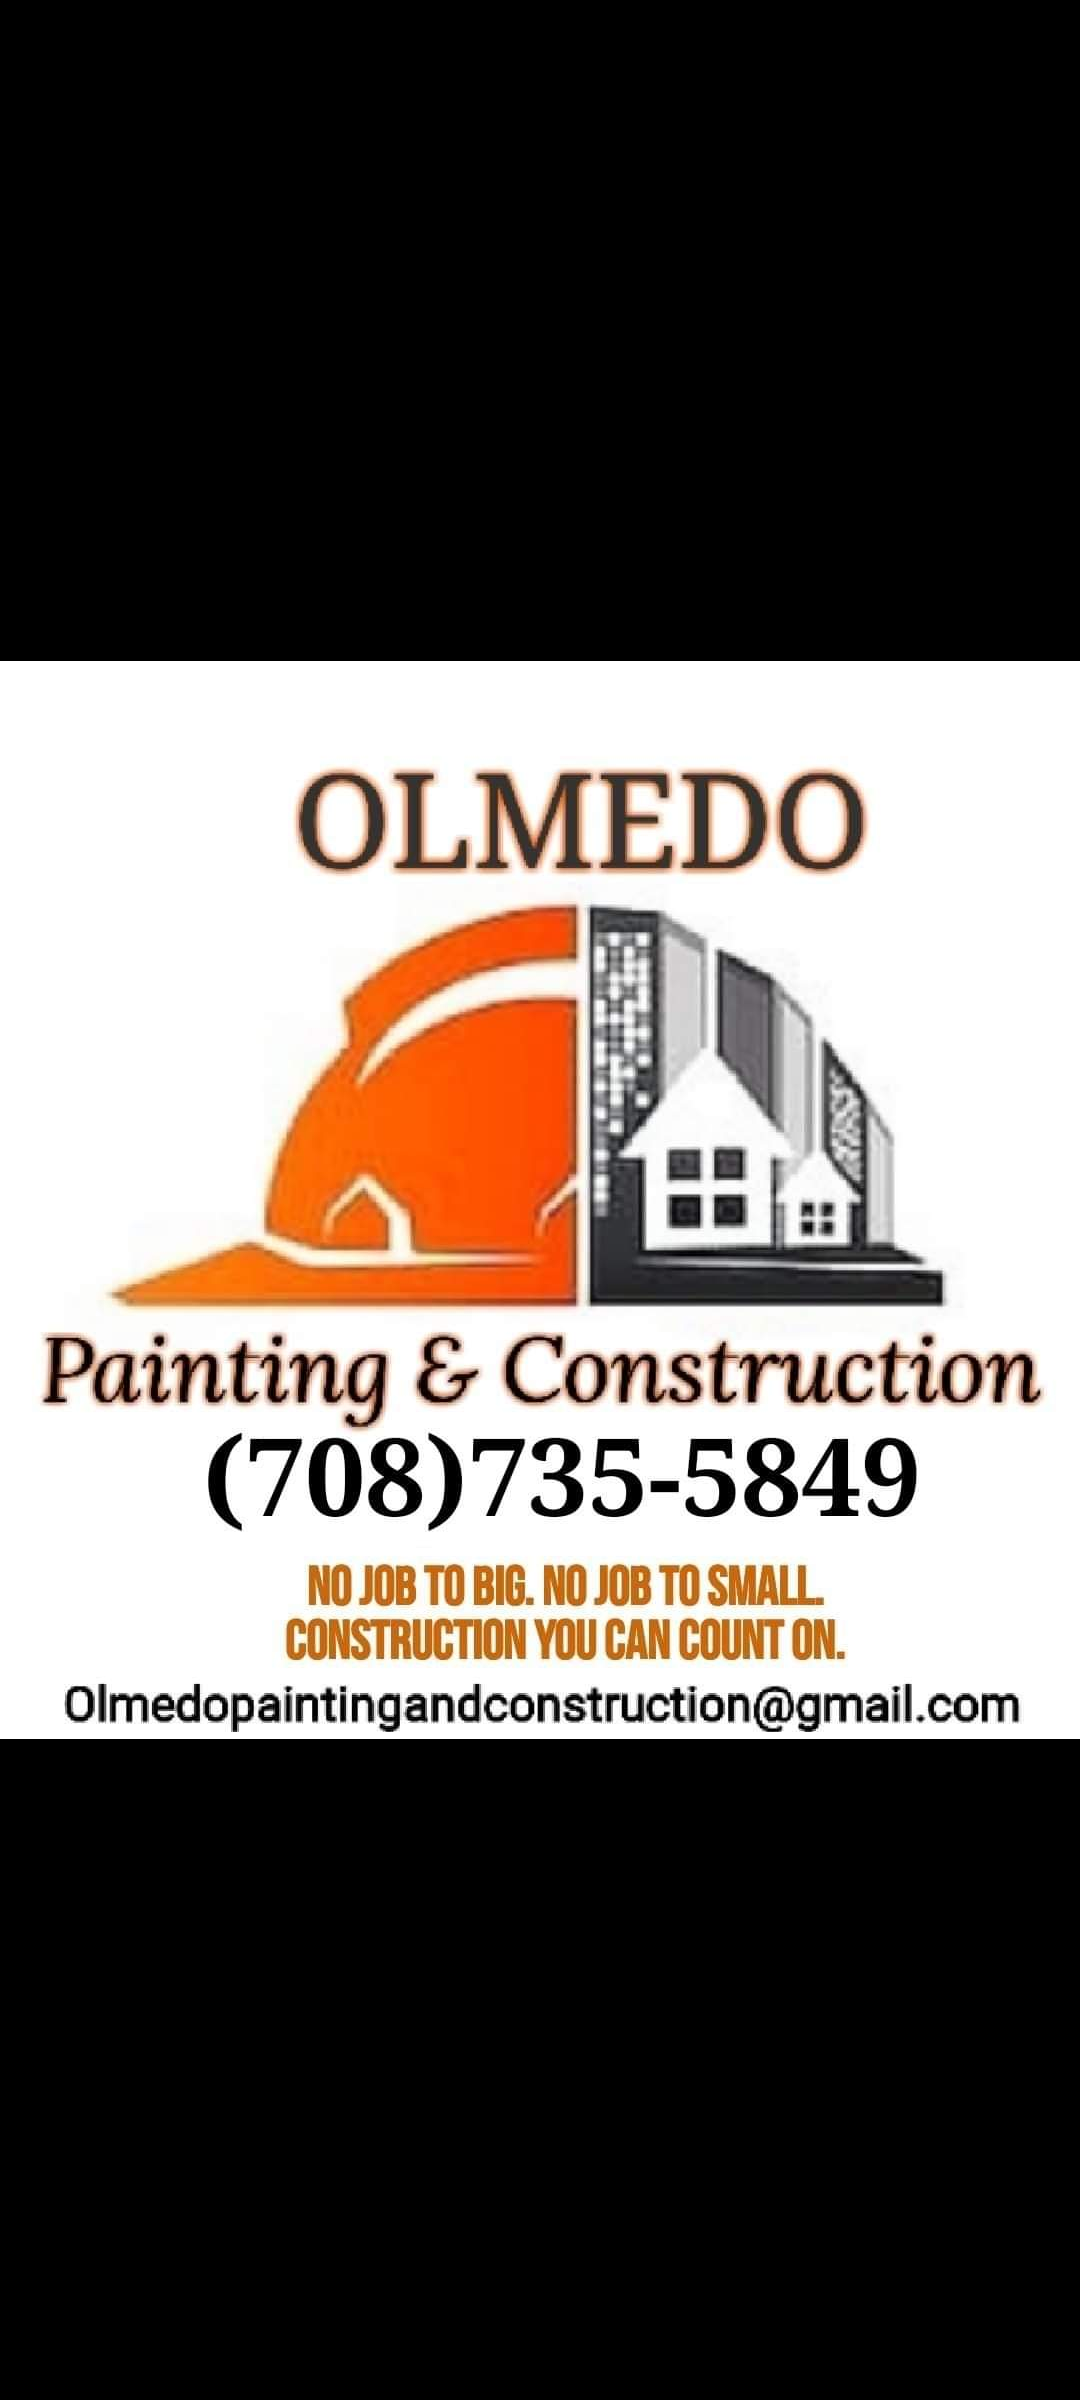 Olmedo Painting and Construction Logo